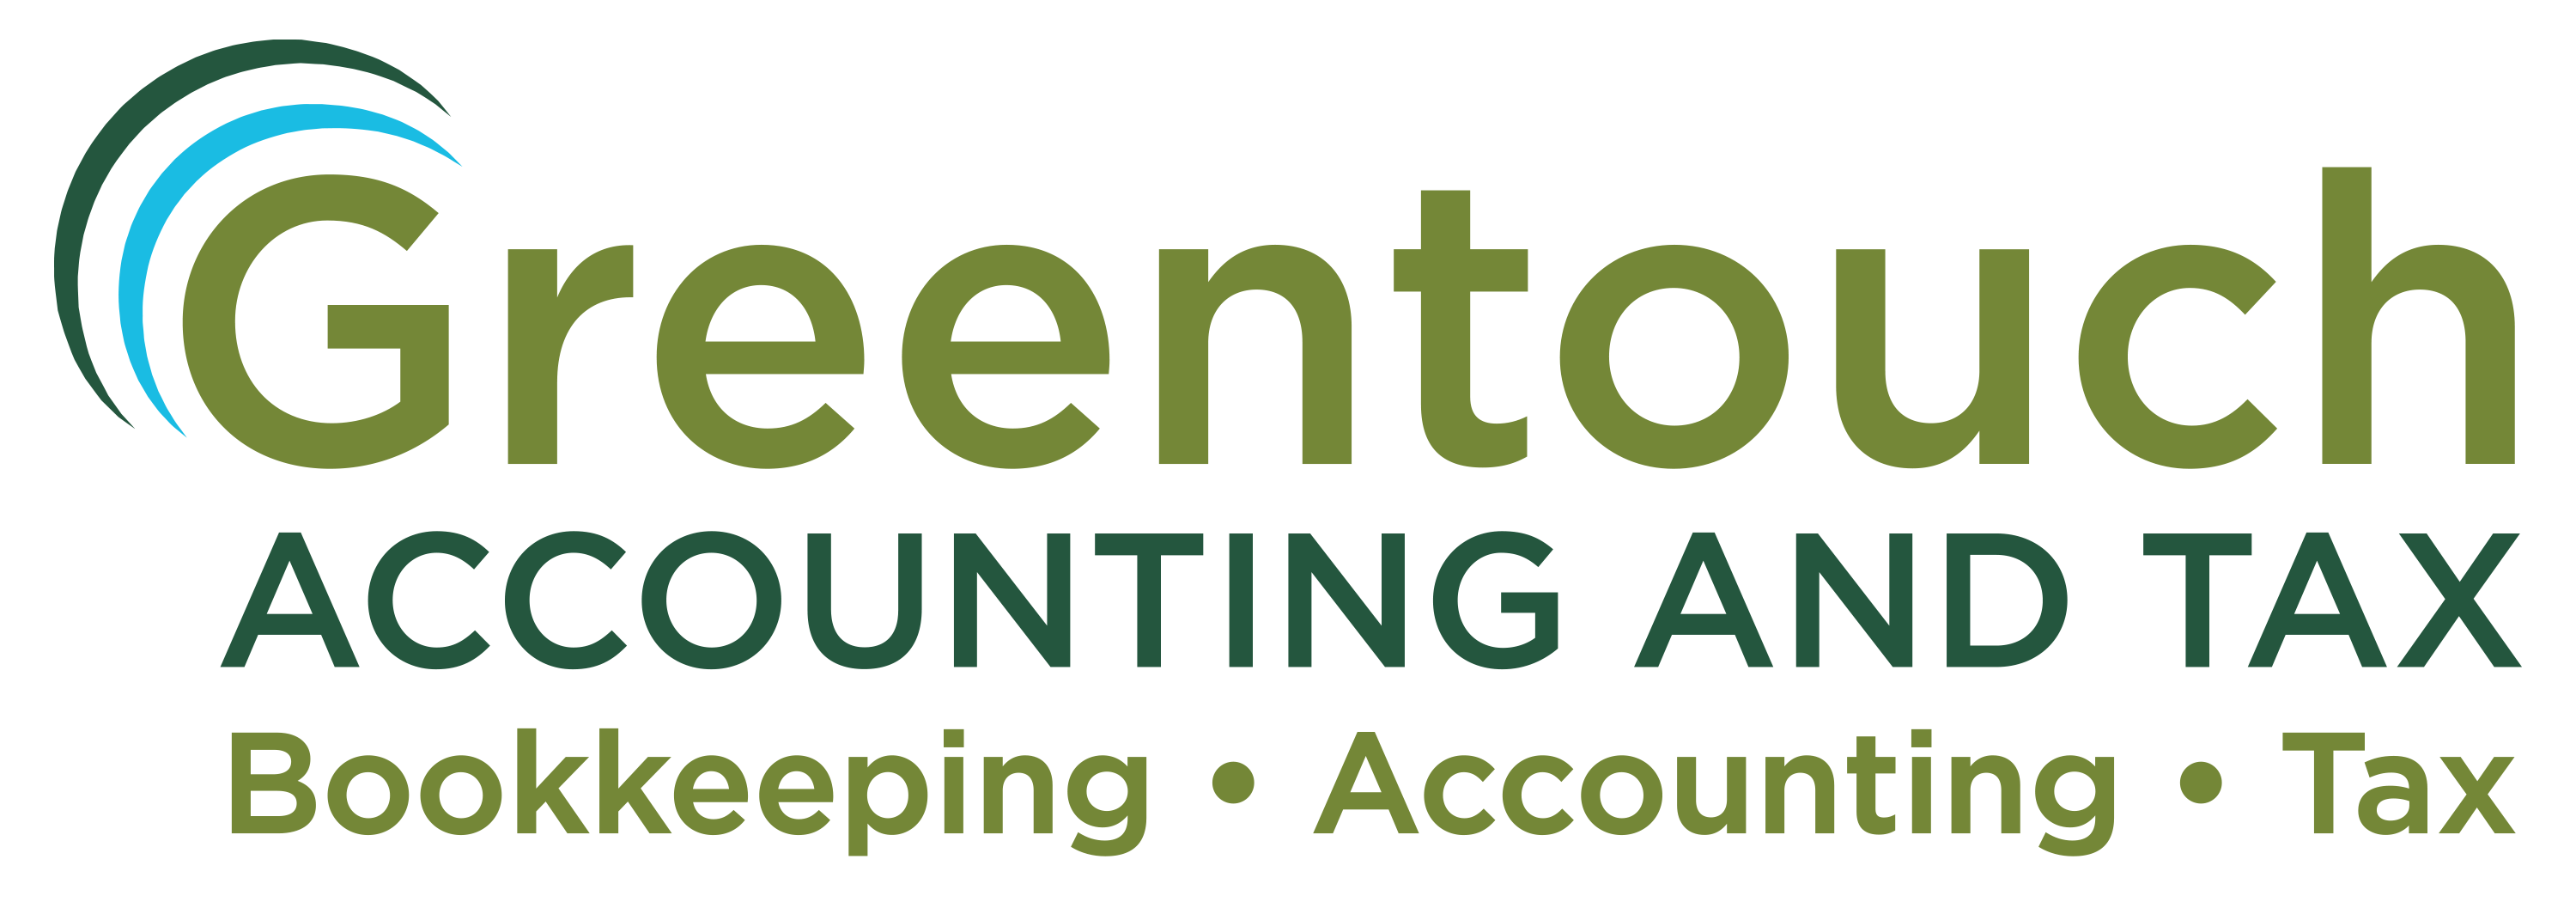 Greentouch Accounting & Tax